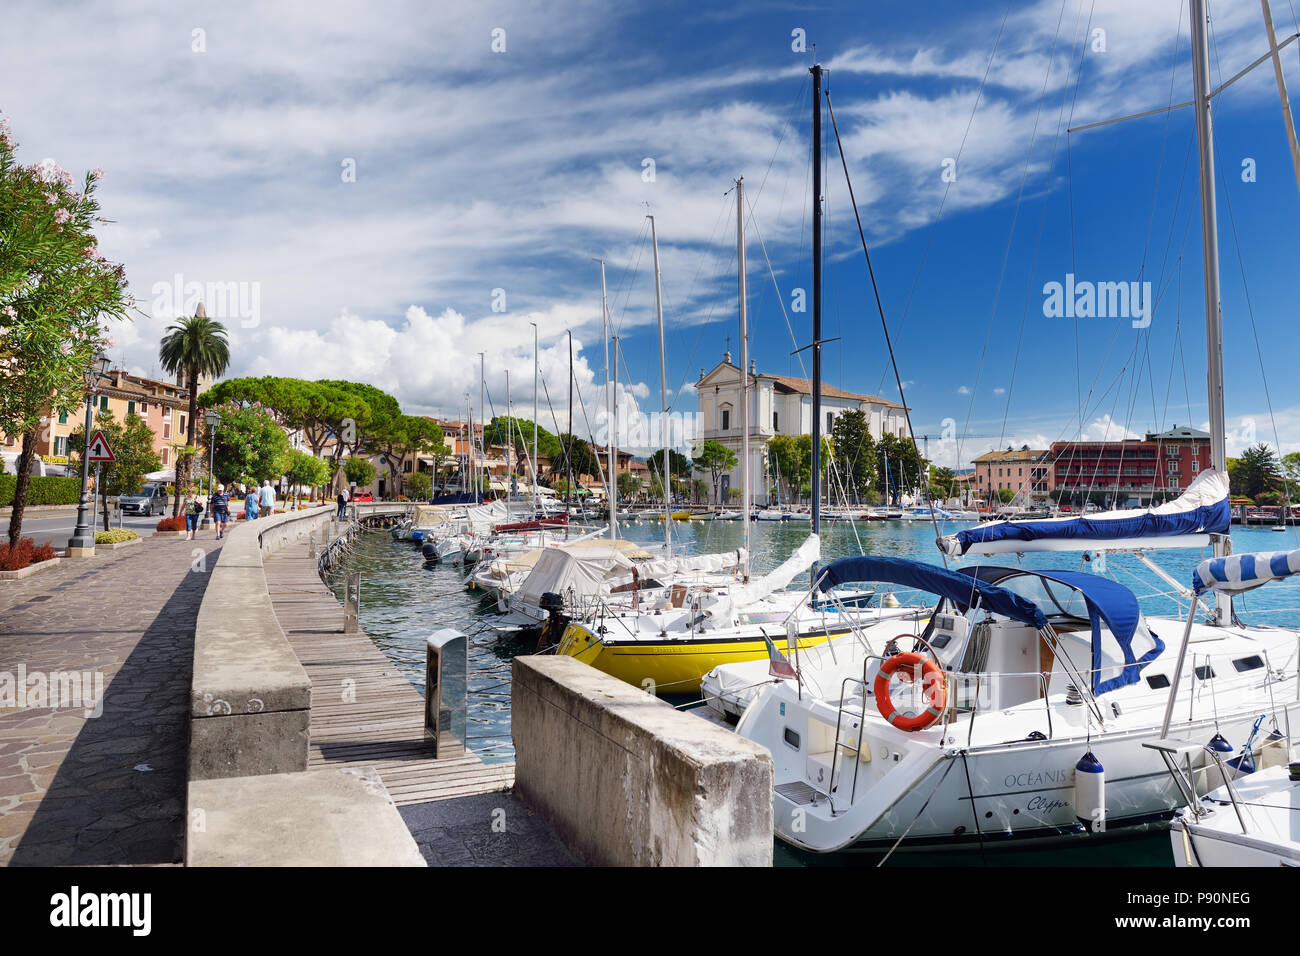 TOSCOLANO-MADERNO, ITALY - SEPTEMBER 18, 2016: Beautiful views of Toscolano-Maderno, a town and comune on the West coast of Lake Garda, in the provinc Stock Photo